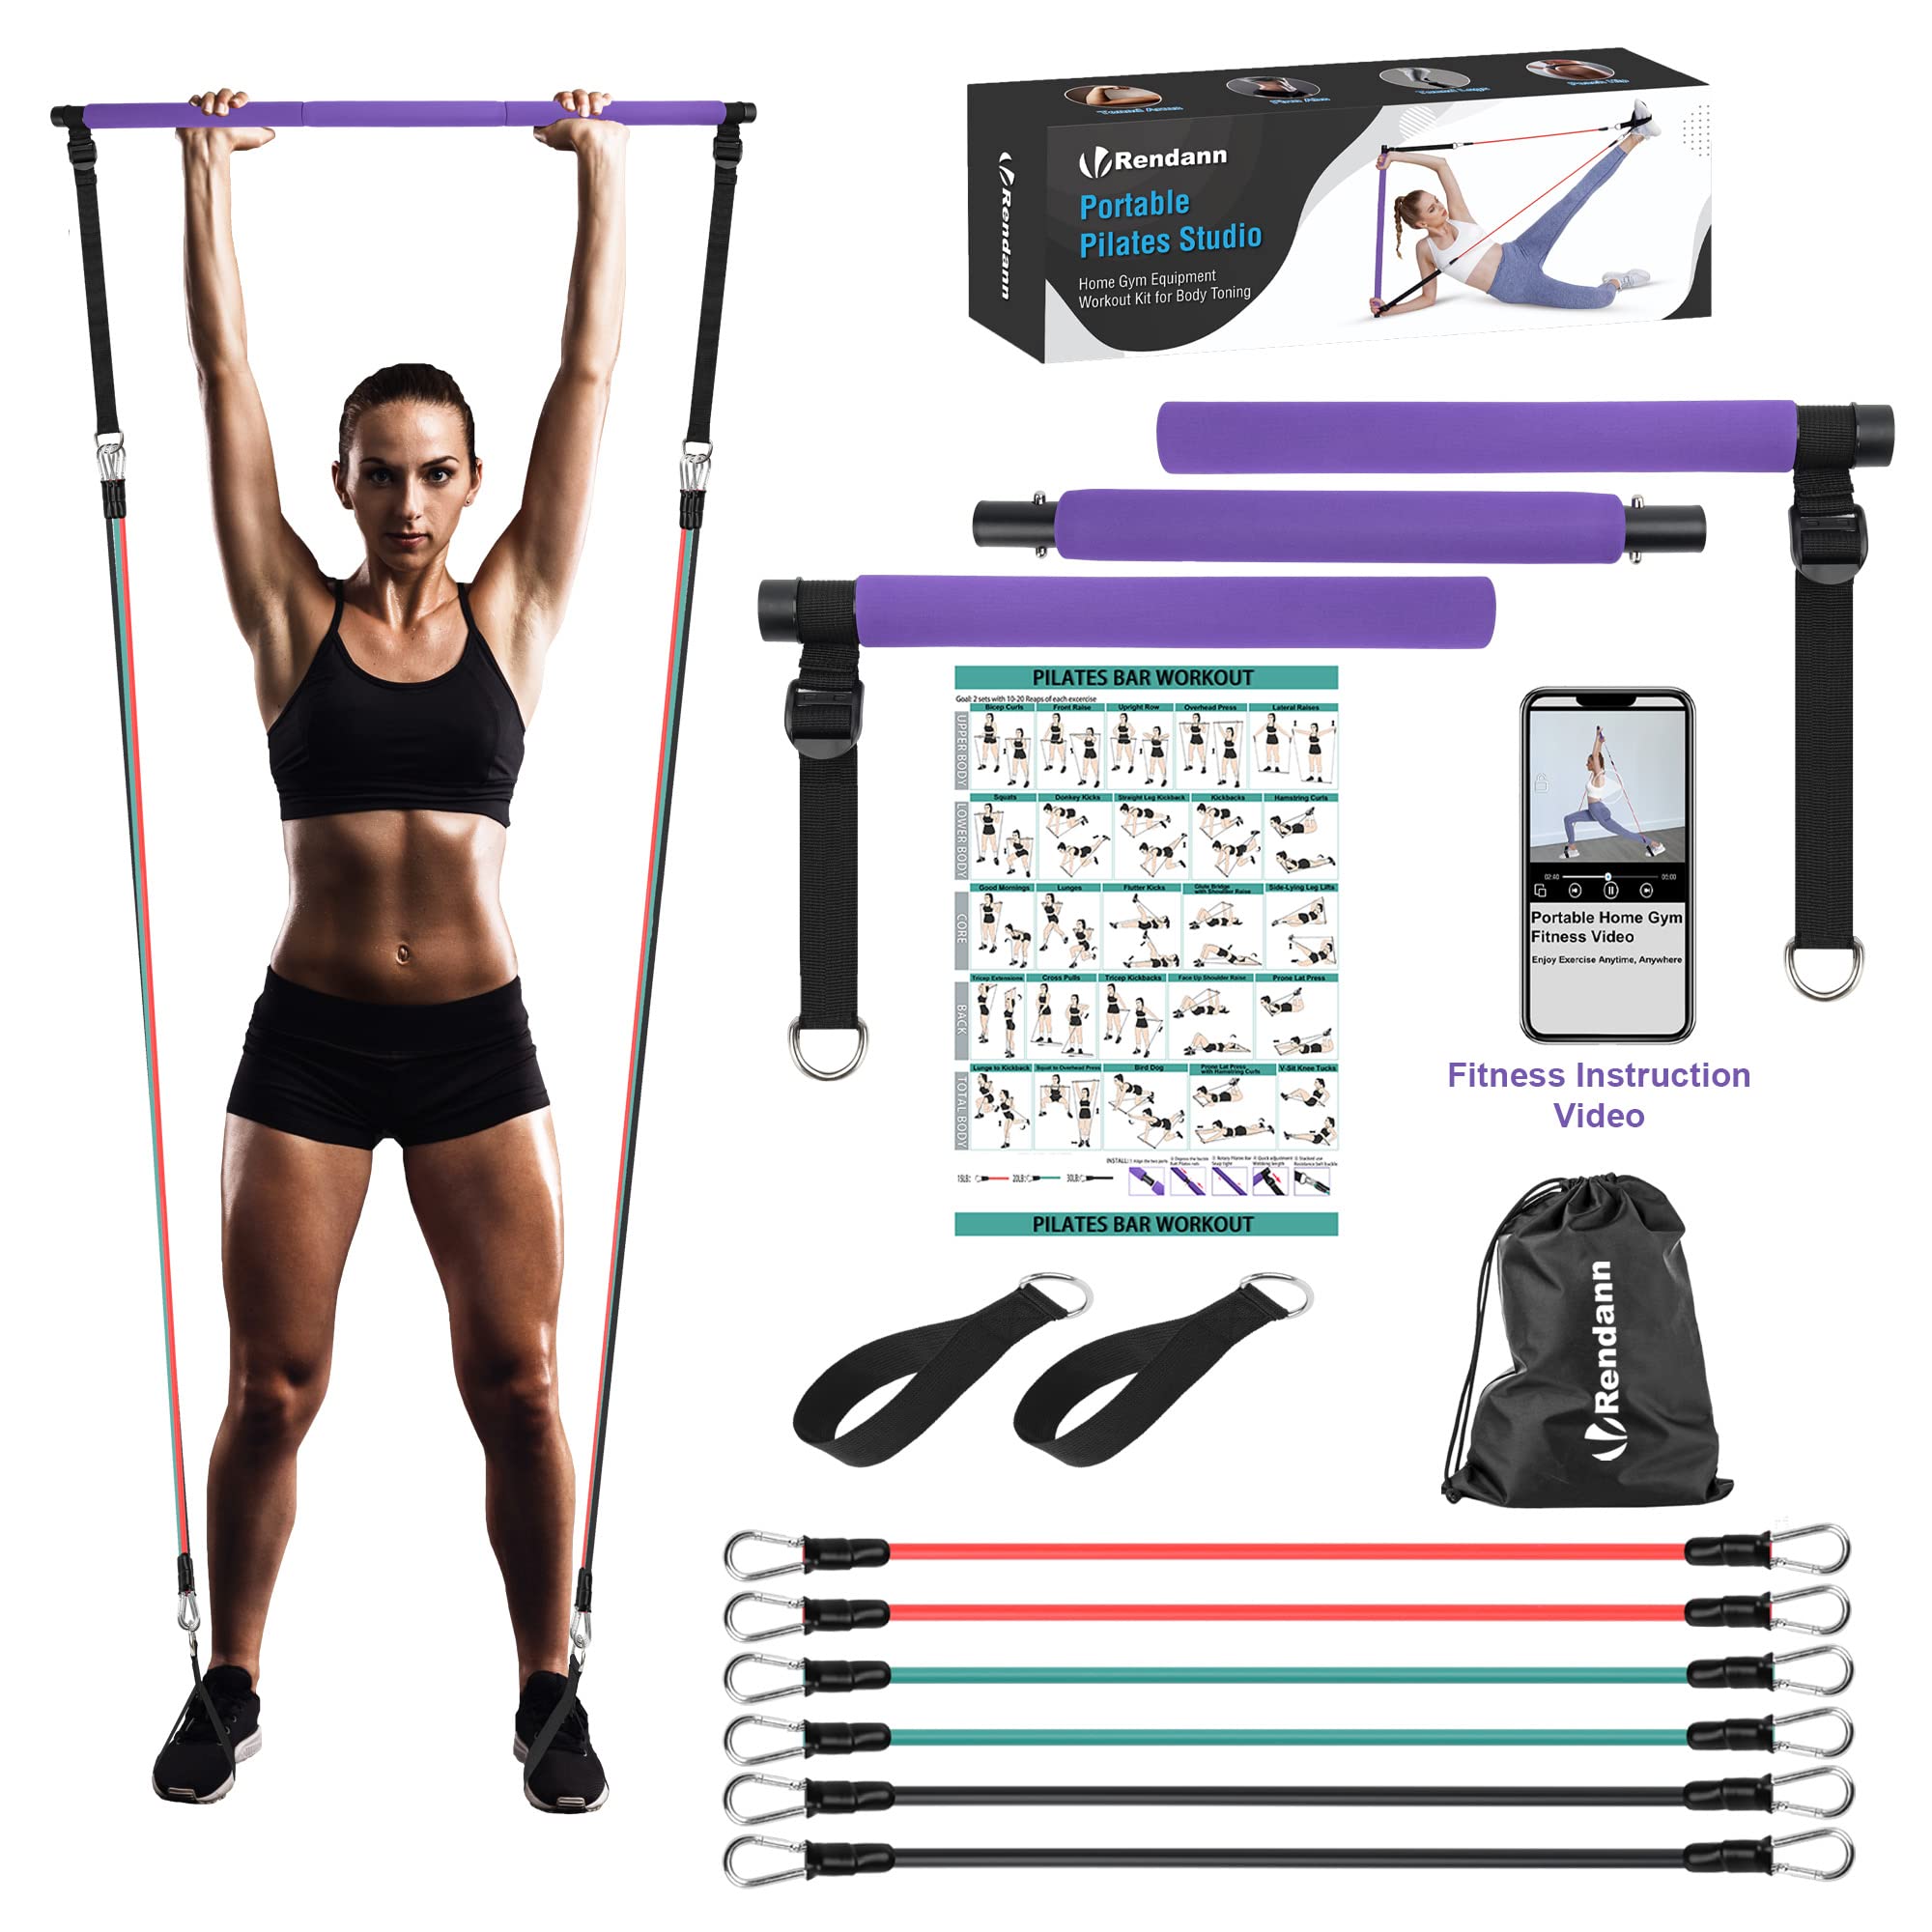 Fitness Accessories  Workout Equipment for Women - Tone It Up